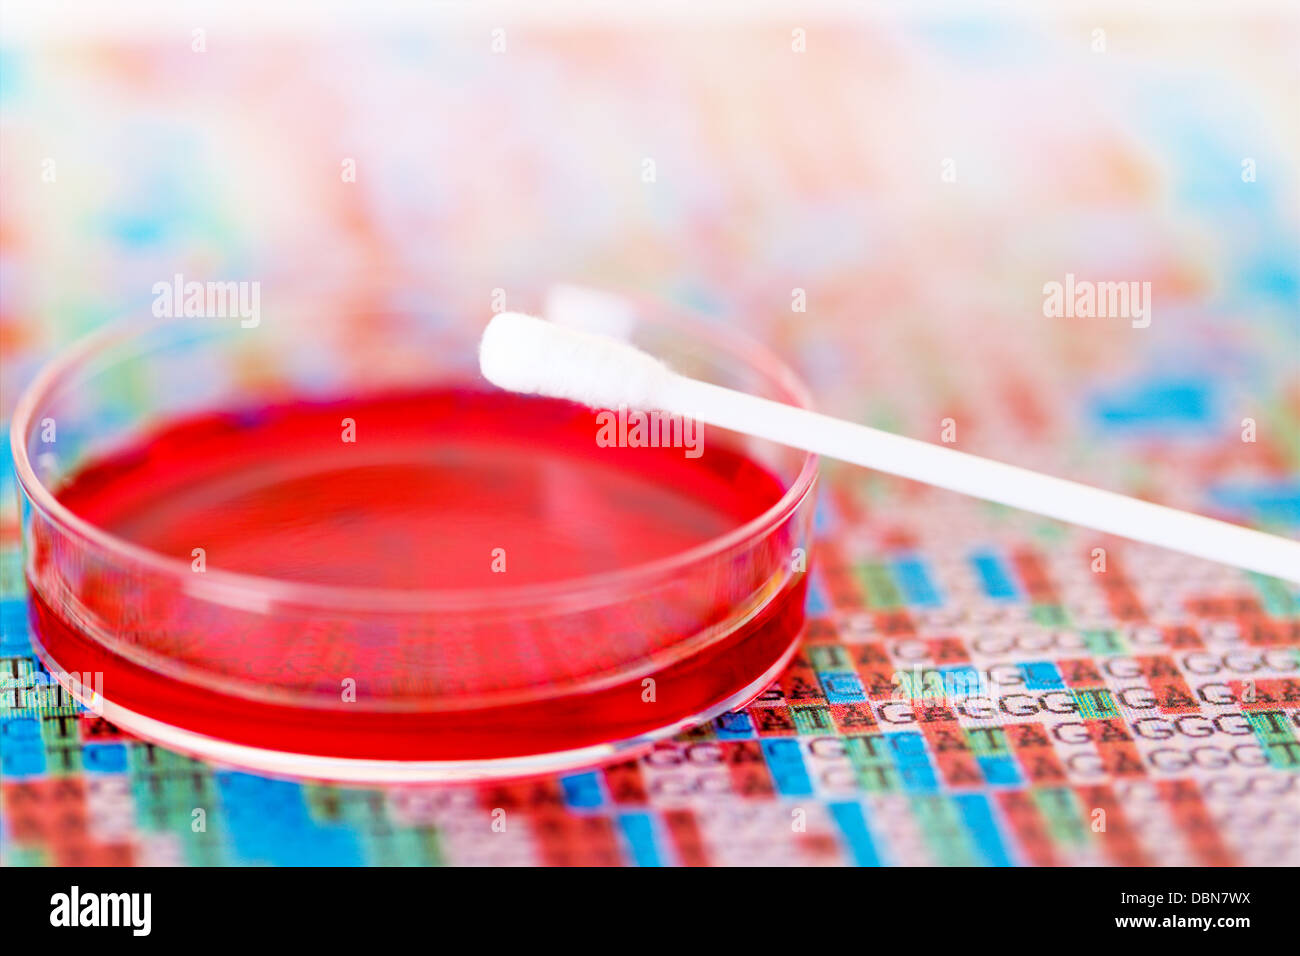 cotton swab to take a sample of DNA Stock Photo